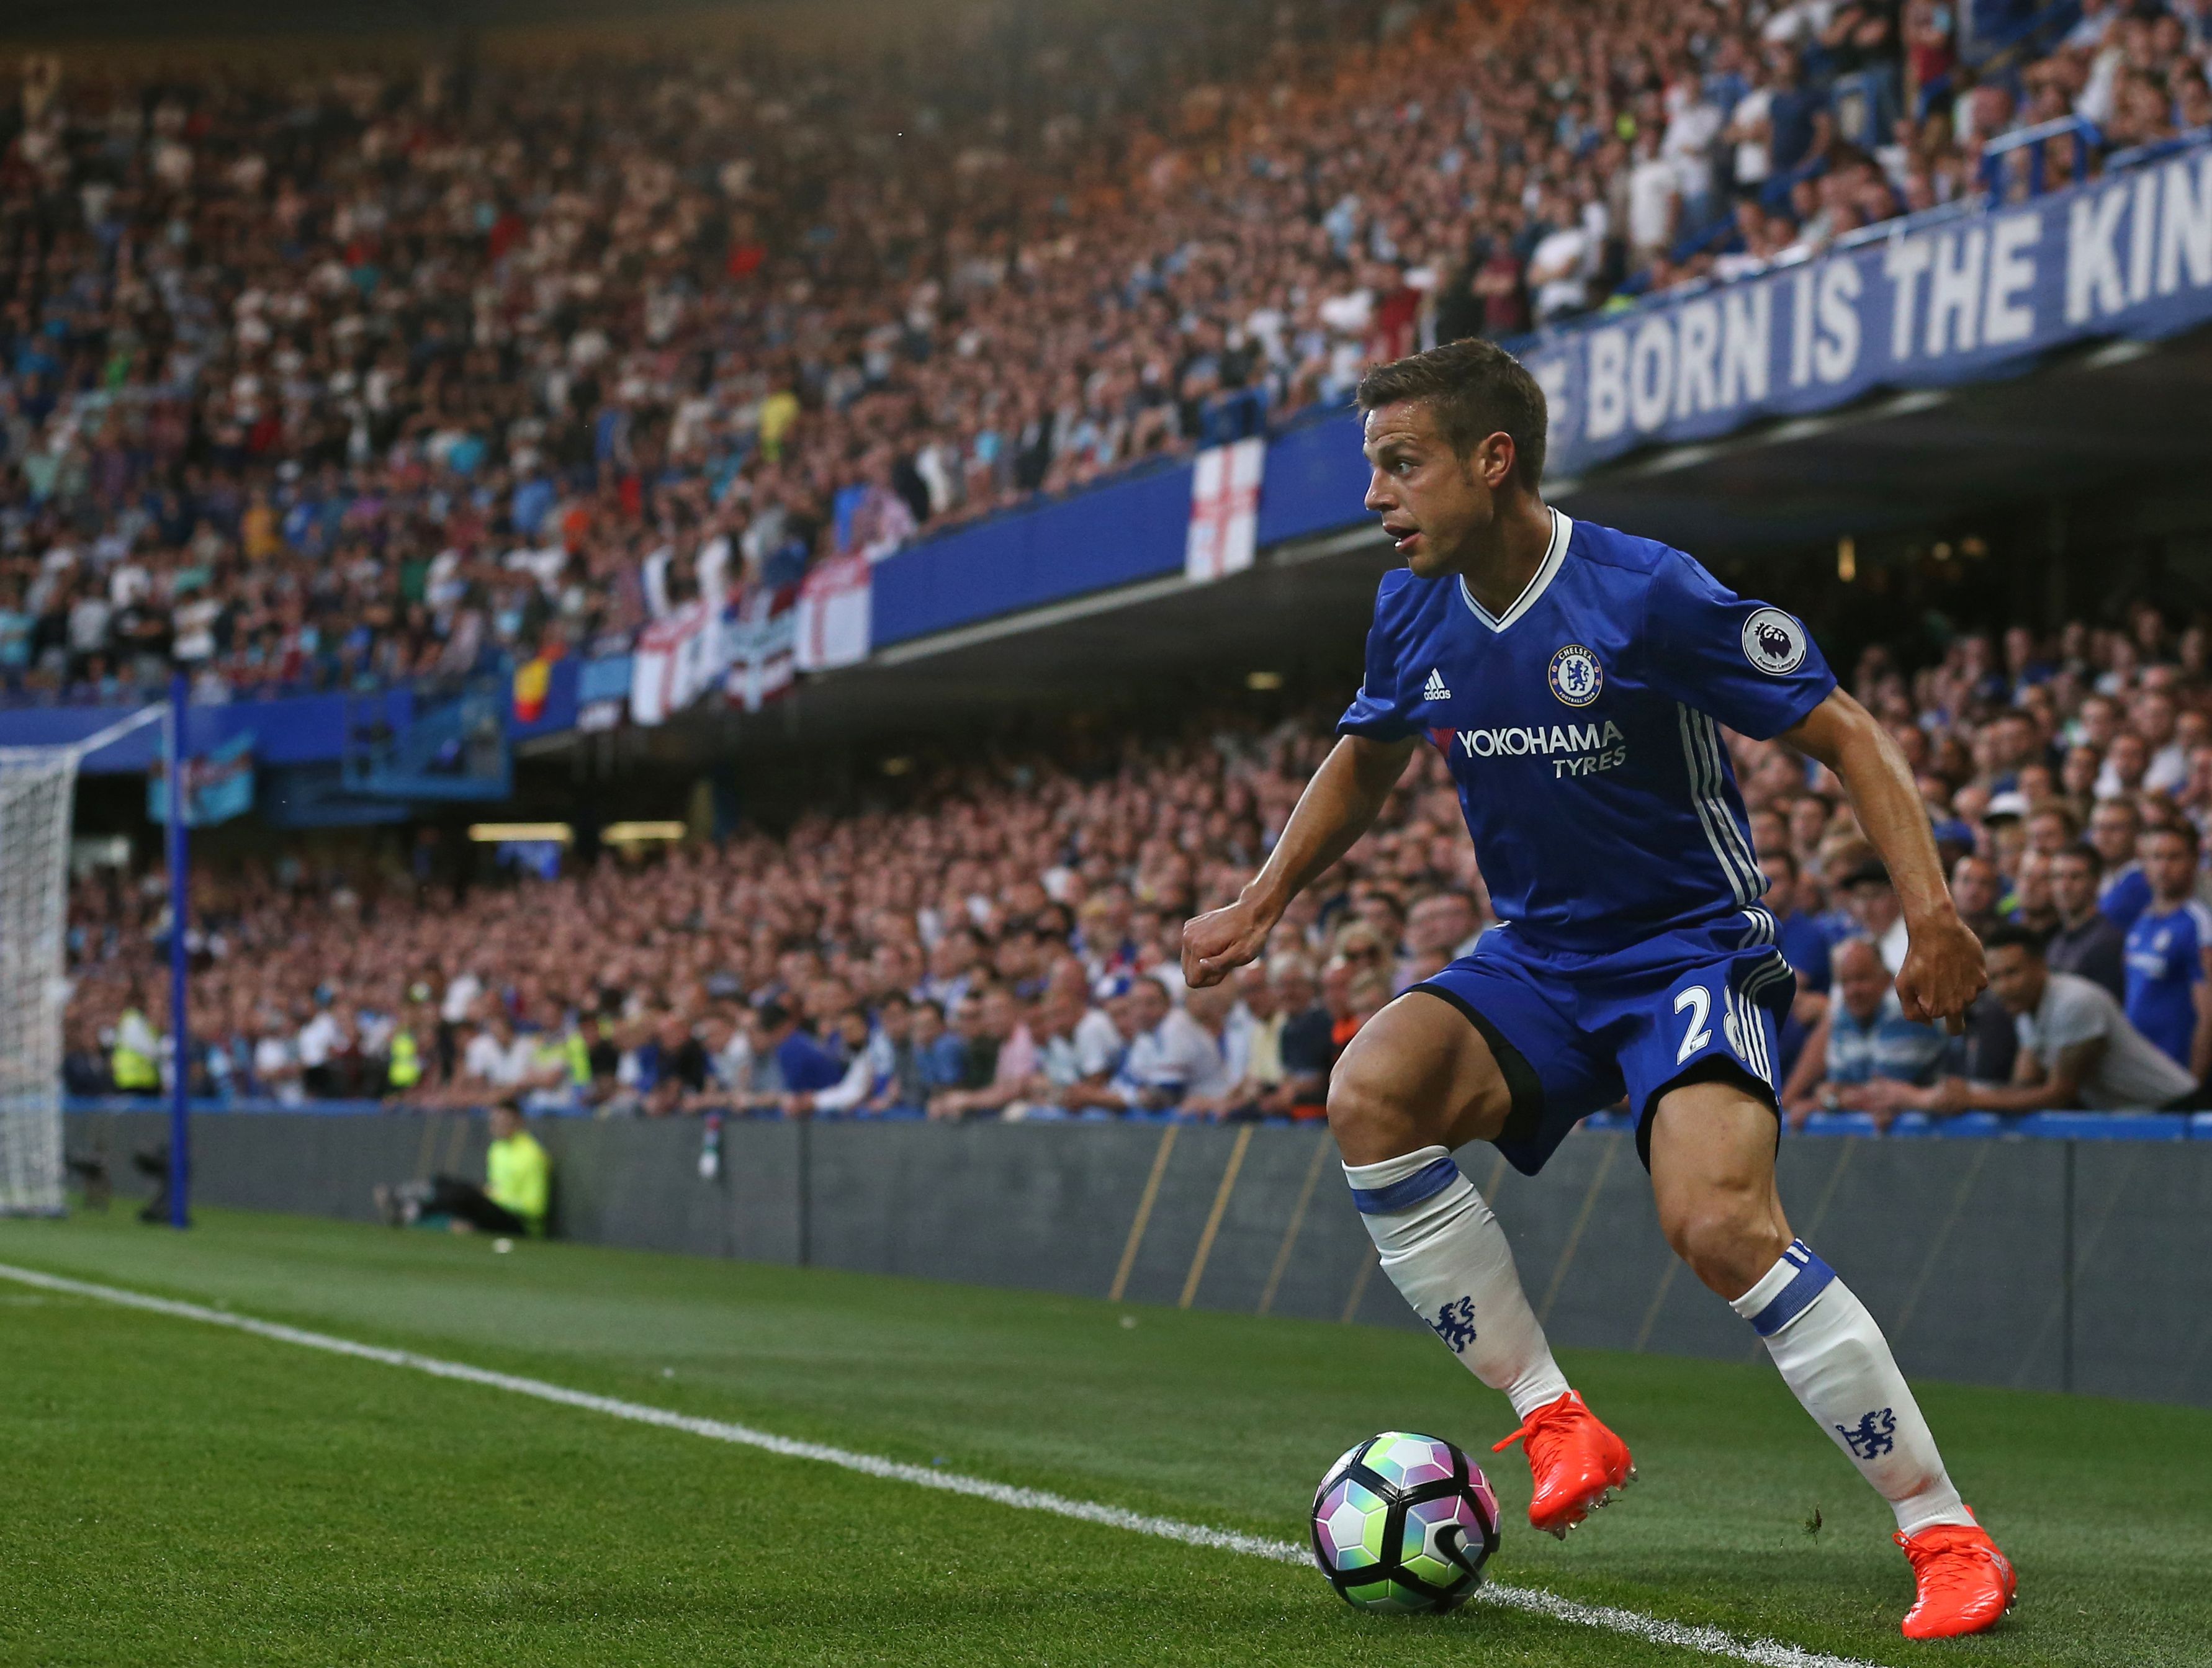 Chelsea's Spanish defender Cesar Azpilicueta controls the ball during the English Premier League football match between Chelsea and West Ham United at Stamford Bridge in London on August 15, 2016. / AFP / Justin TALLIS / RESTRICTED TO EDITORIAL USE. No use with unauthorized audio, video, data, fixture lists, club/league logos or 'live' services. Online in-match use limited to 75 images, no video emulation. No use in betting, games or single club/league/player publications.  /         (Photo credit should read JUSTIN TALLIS/AFP/Getty Images)